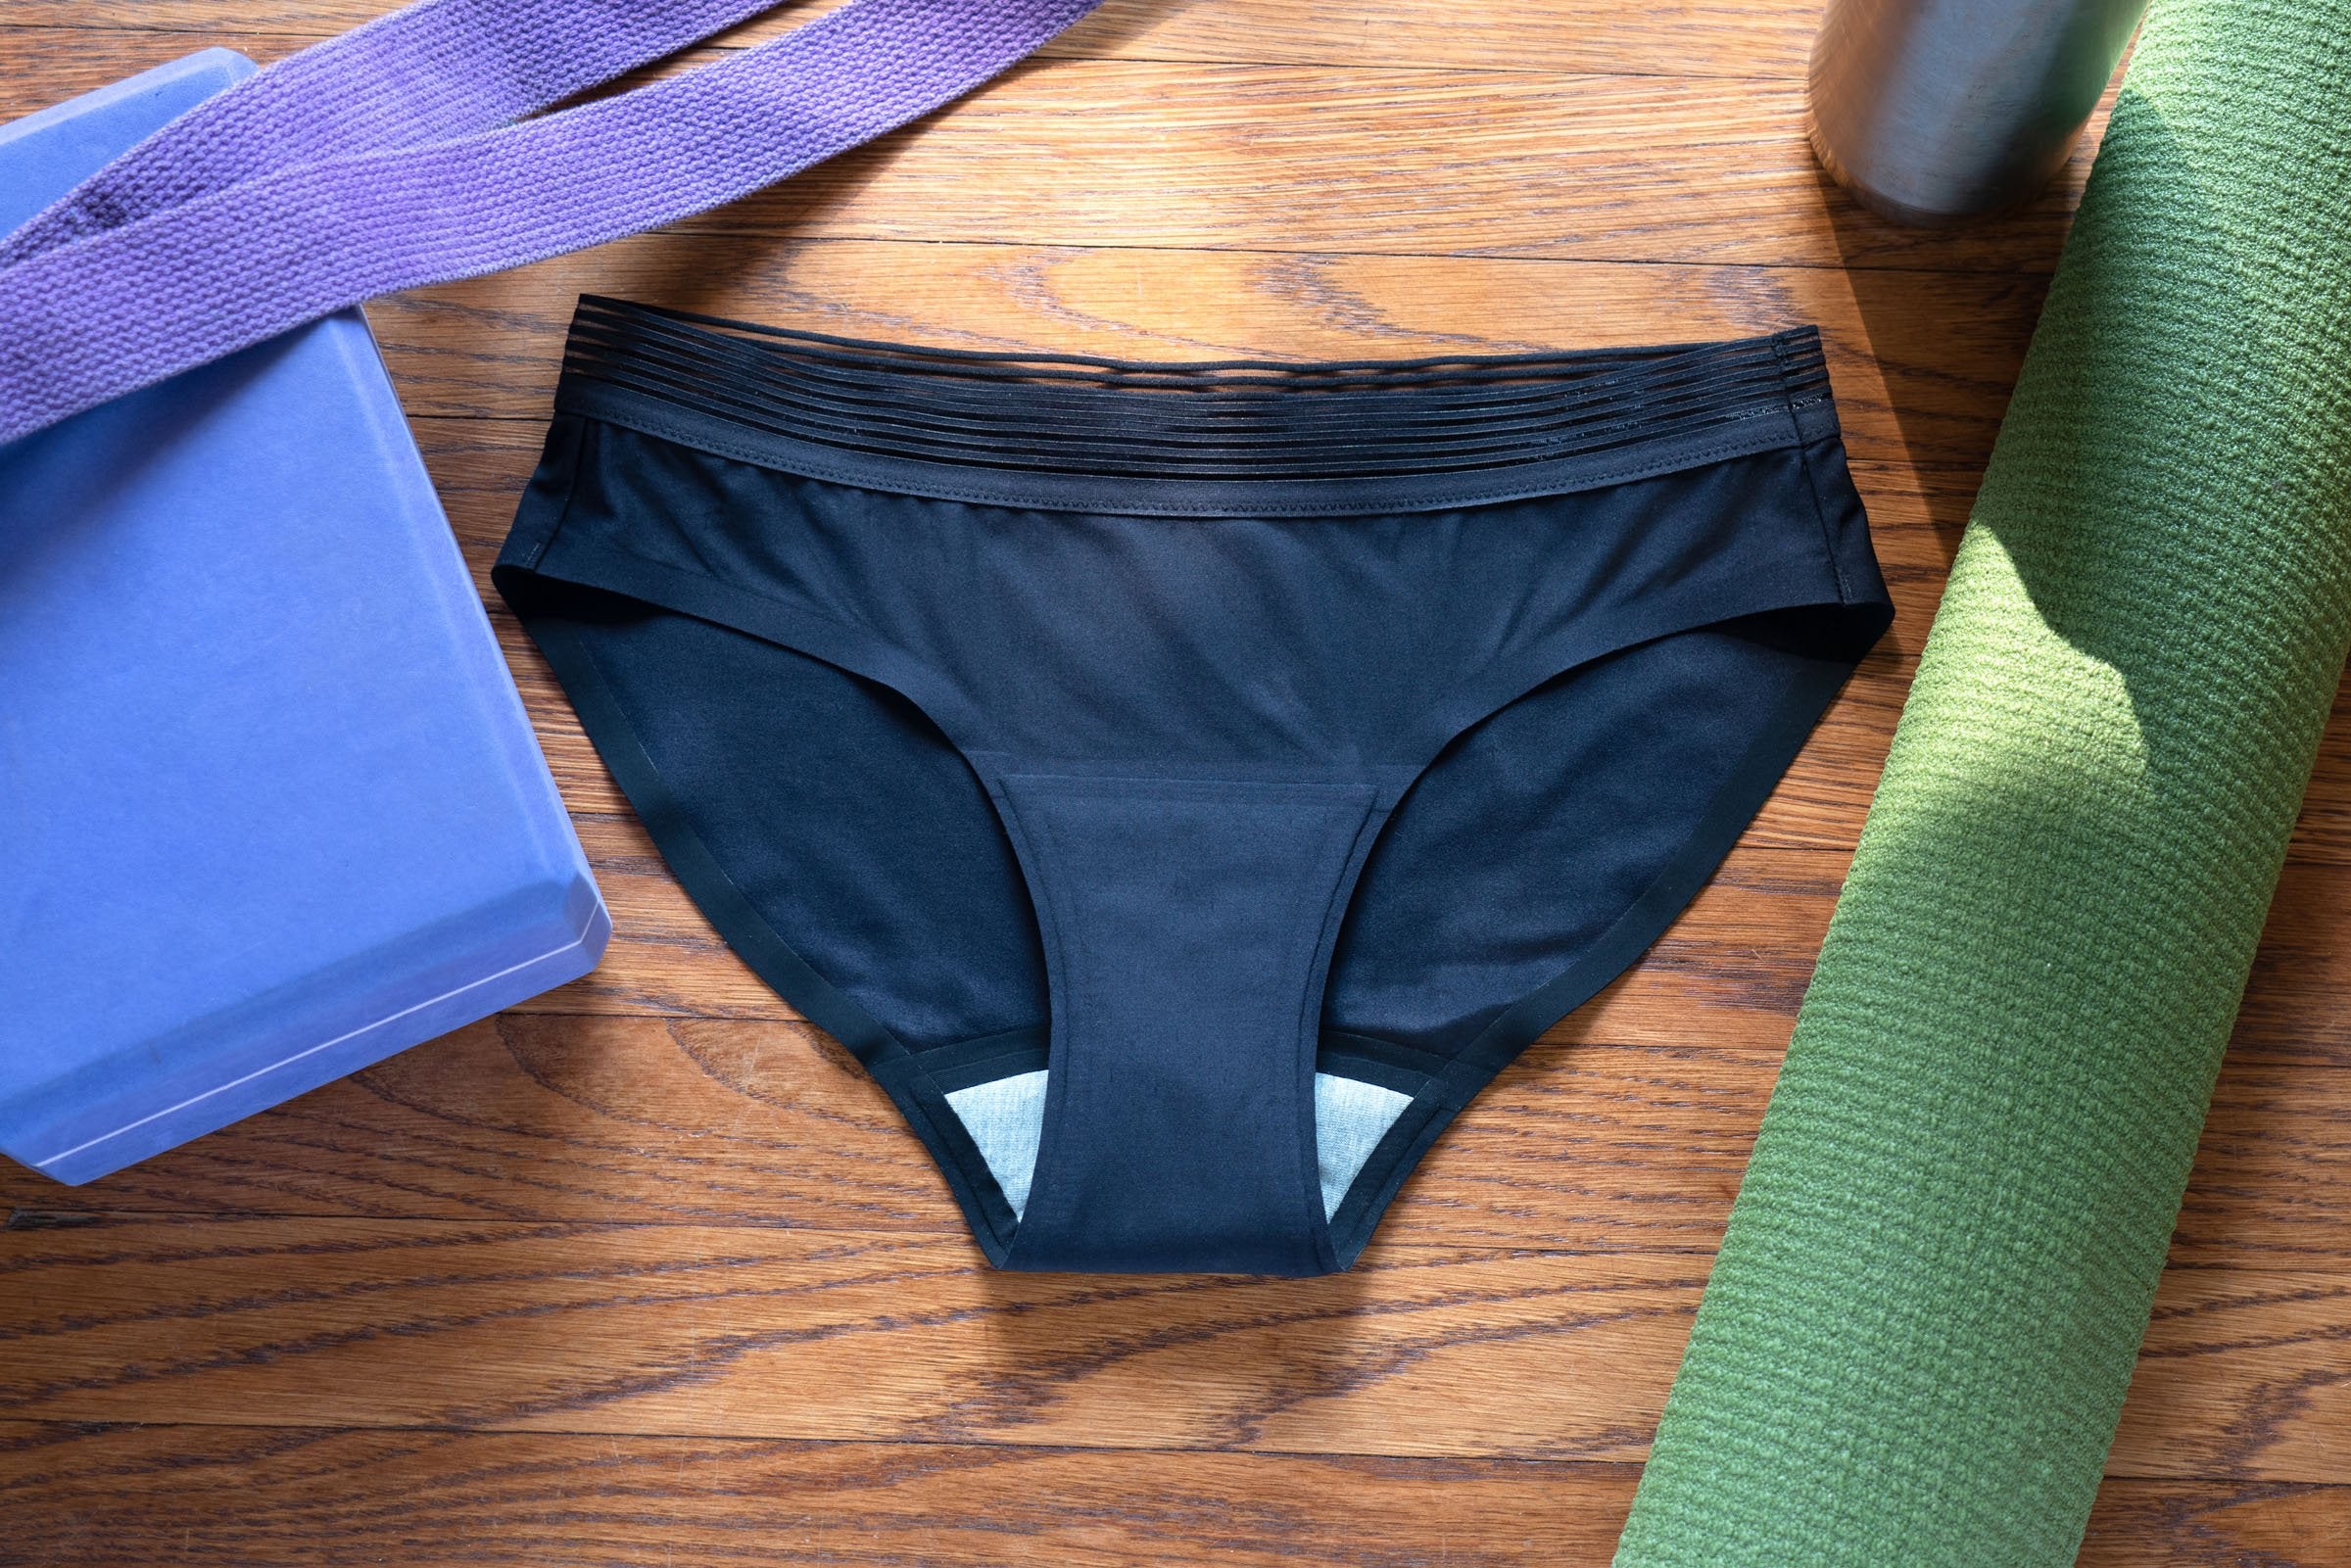 Leak Proof Underwear for the Woman on the Go